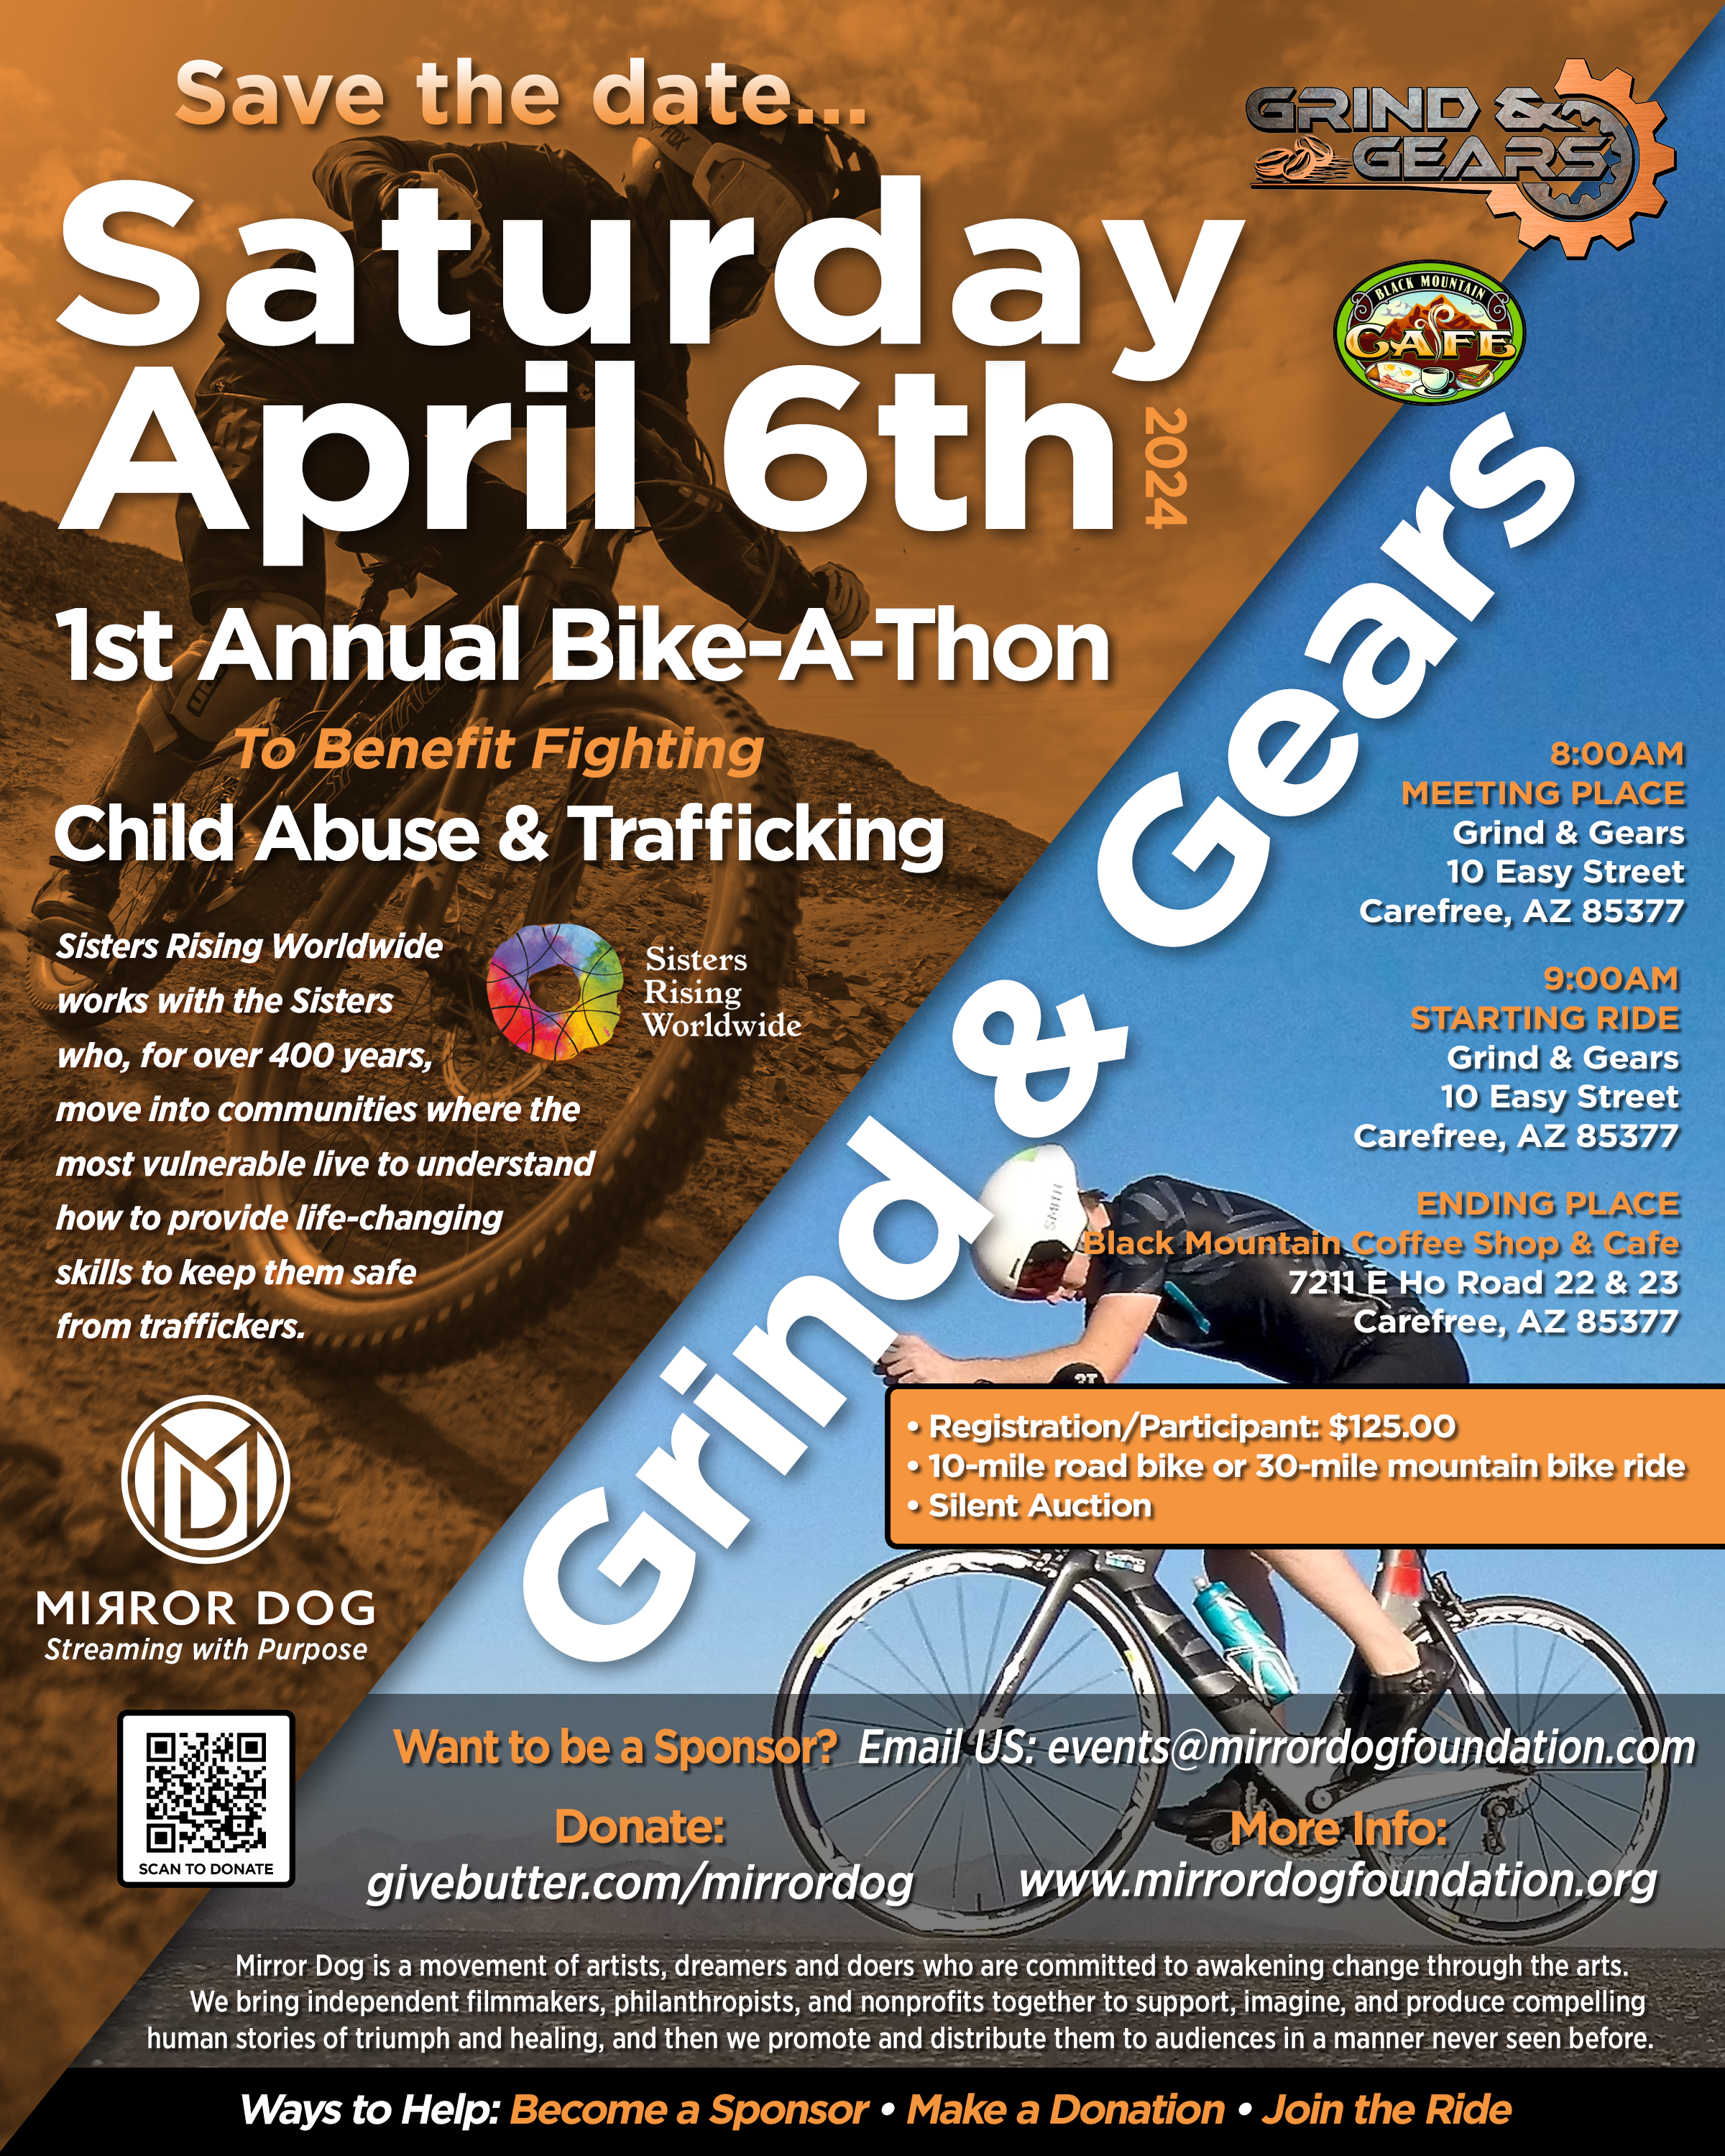 Grind and Gears First Annual Bike-A-Thon